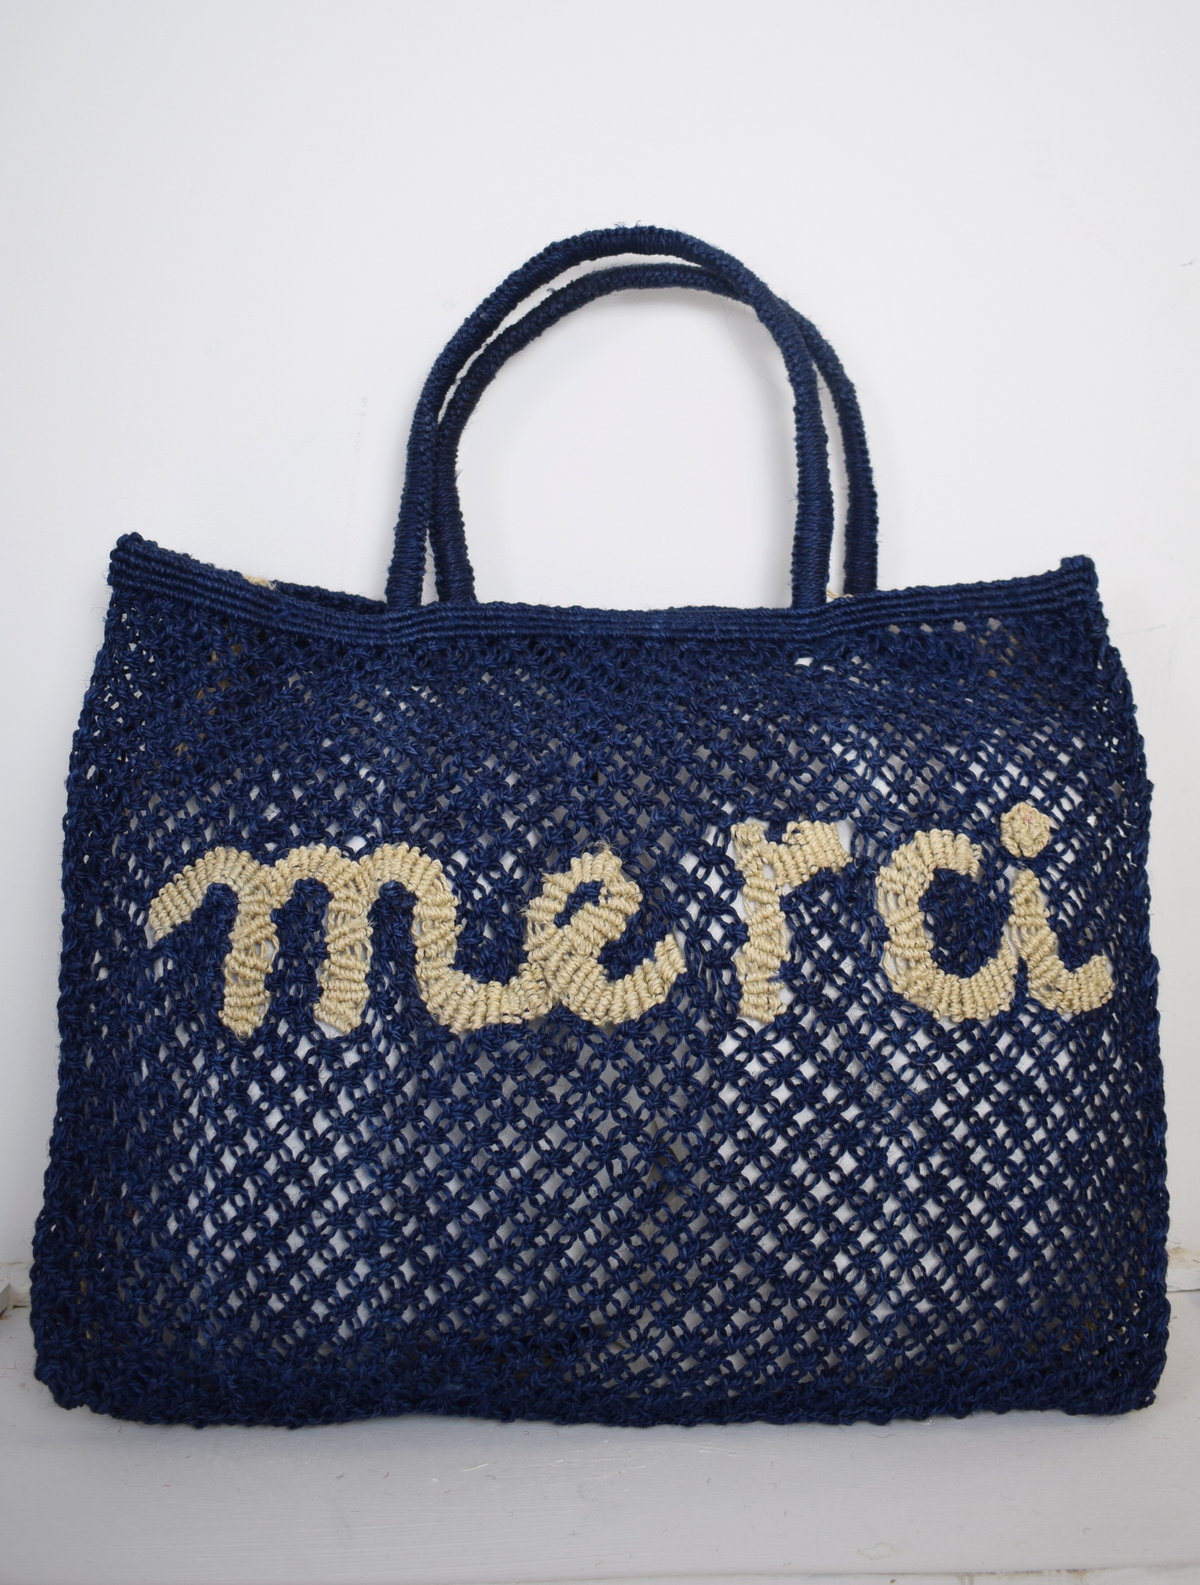 Blue woven bag with neautral writing on saying Merci 